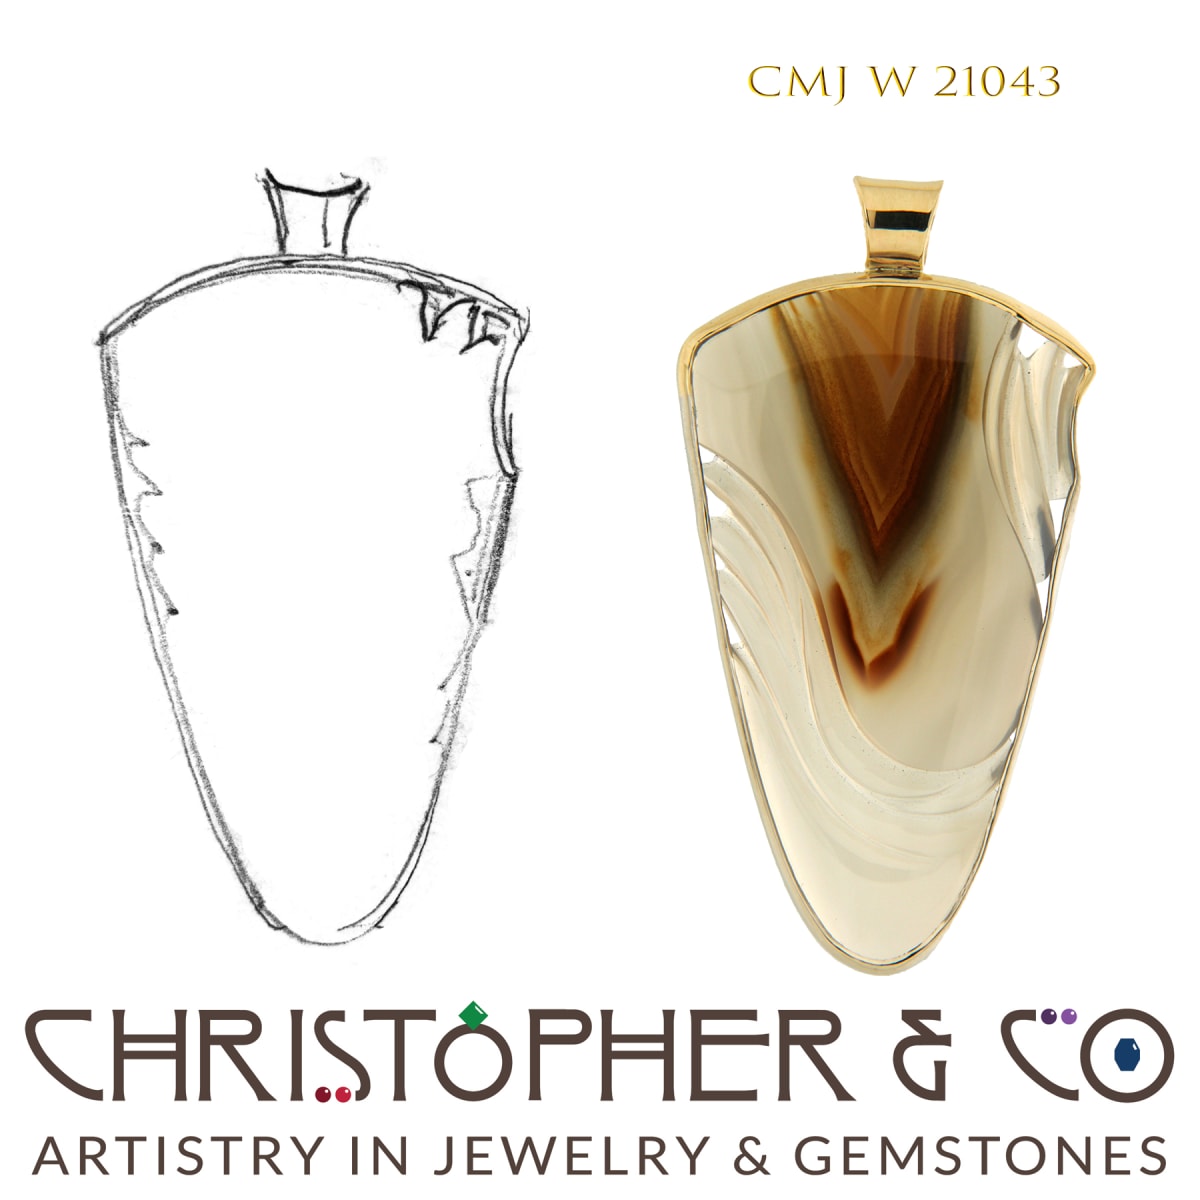 CMJ W 21043 Yellow & White Gold Pendant by Christopher M. Jupp set with Brazilian Agate handcarved by Darryl Alexander.  Image: CMJ W 21043 Yellow & White Gold Pendant by Christopher M. Jupp set with Brazilian Agate handcarved by Darryl Alexander.